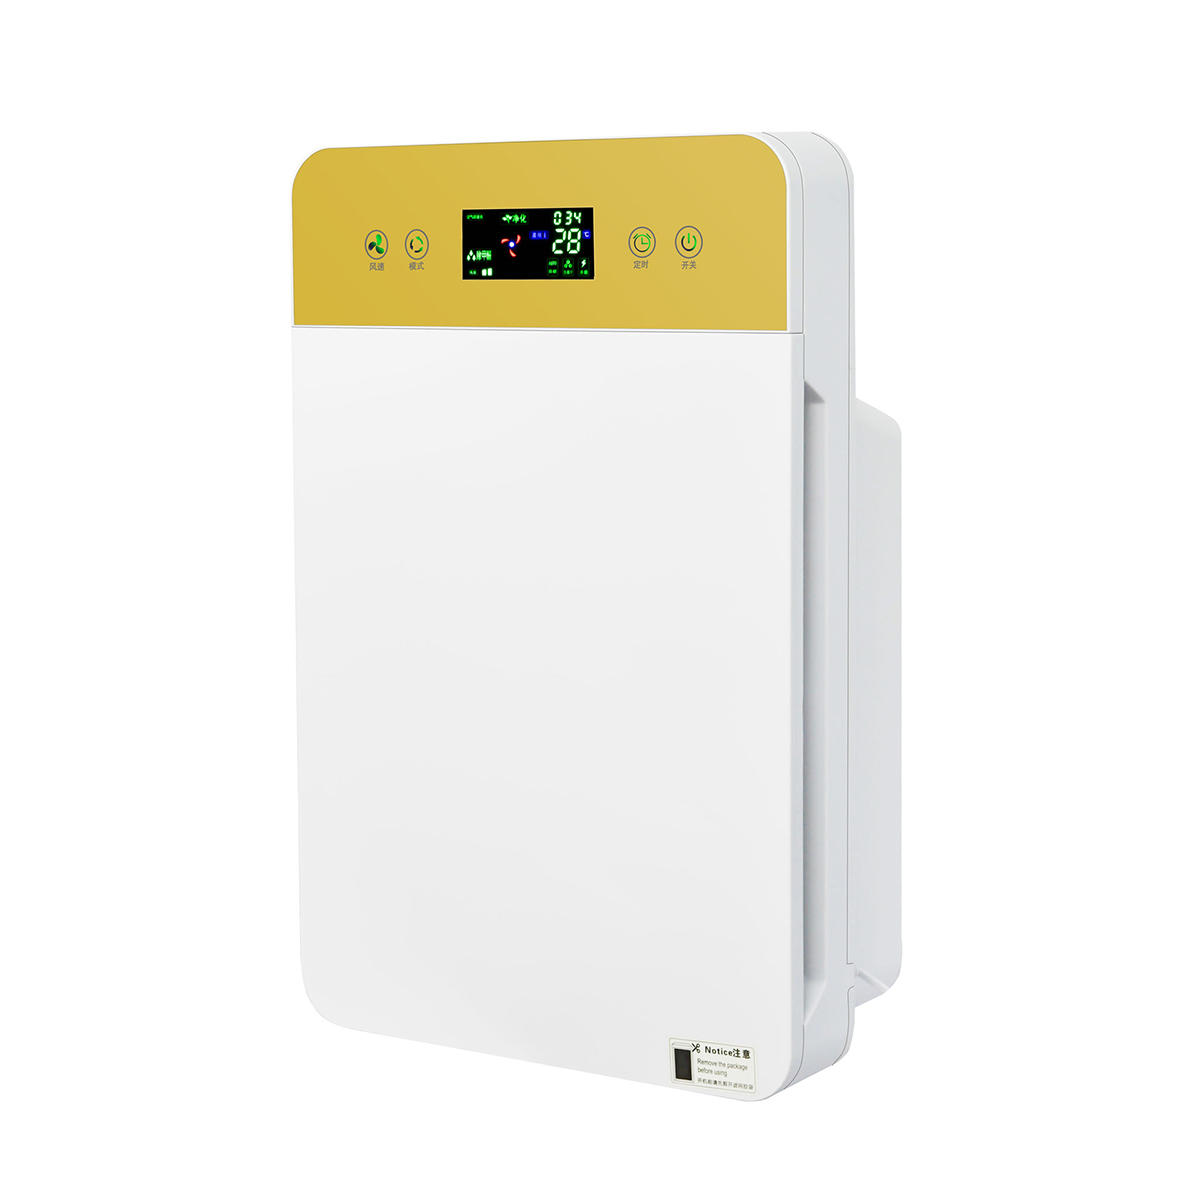 220V 35W HEPA Filter Air Purifier Ionizer PM2.5 Odor Removal